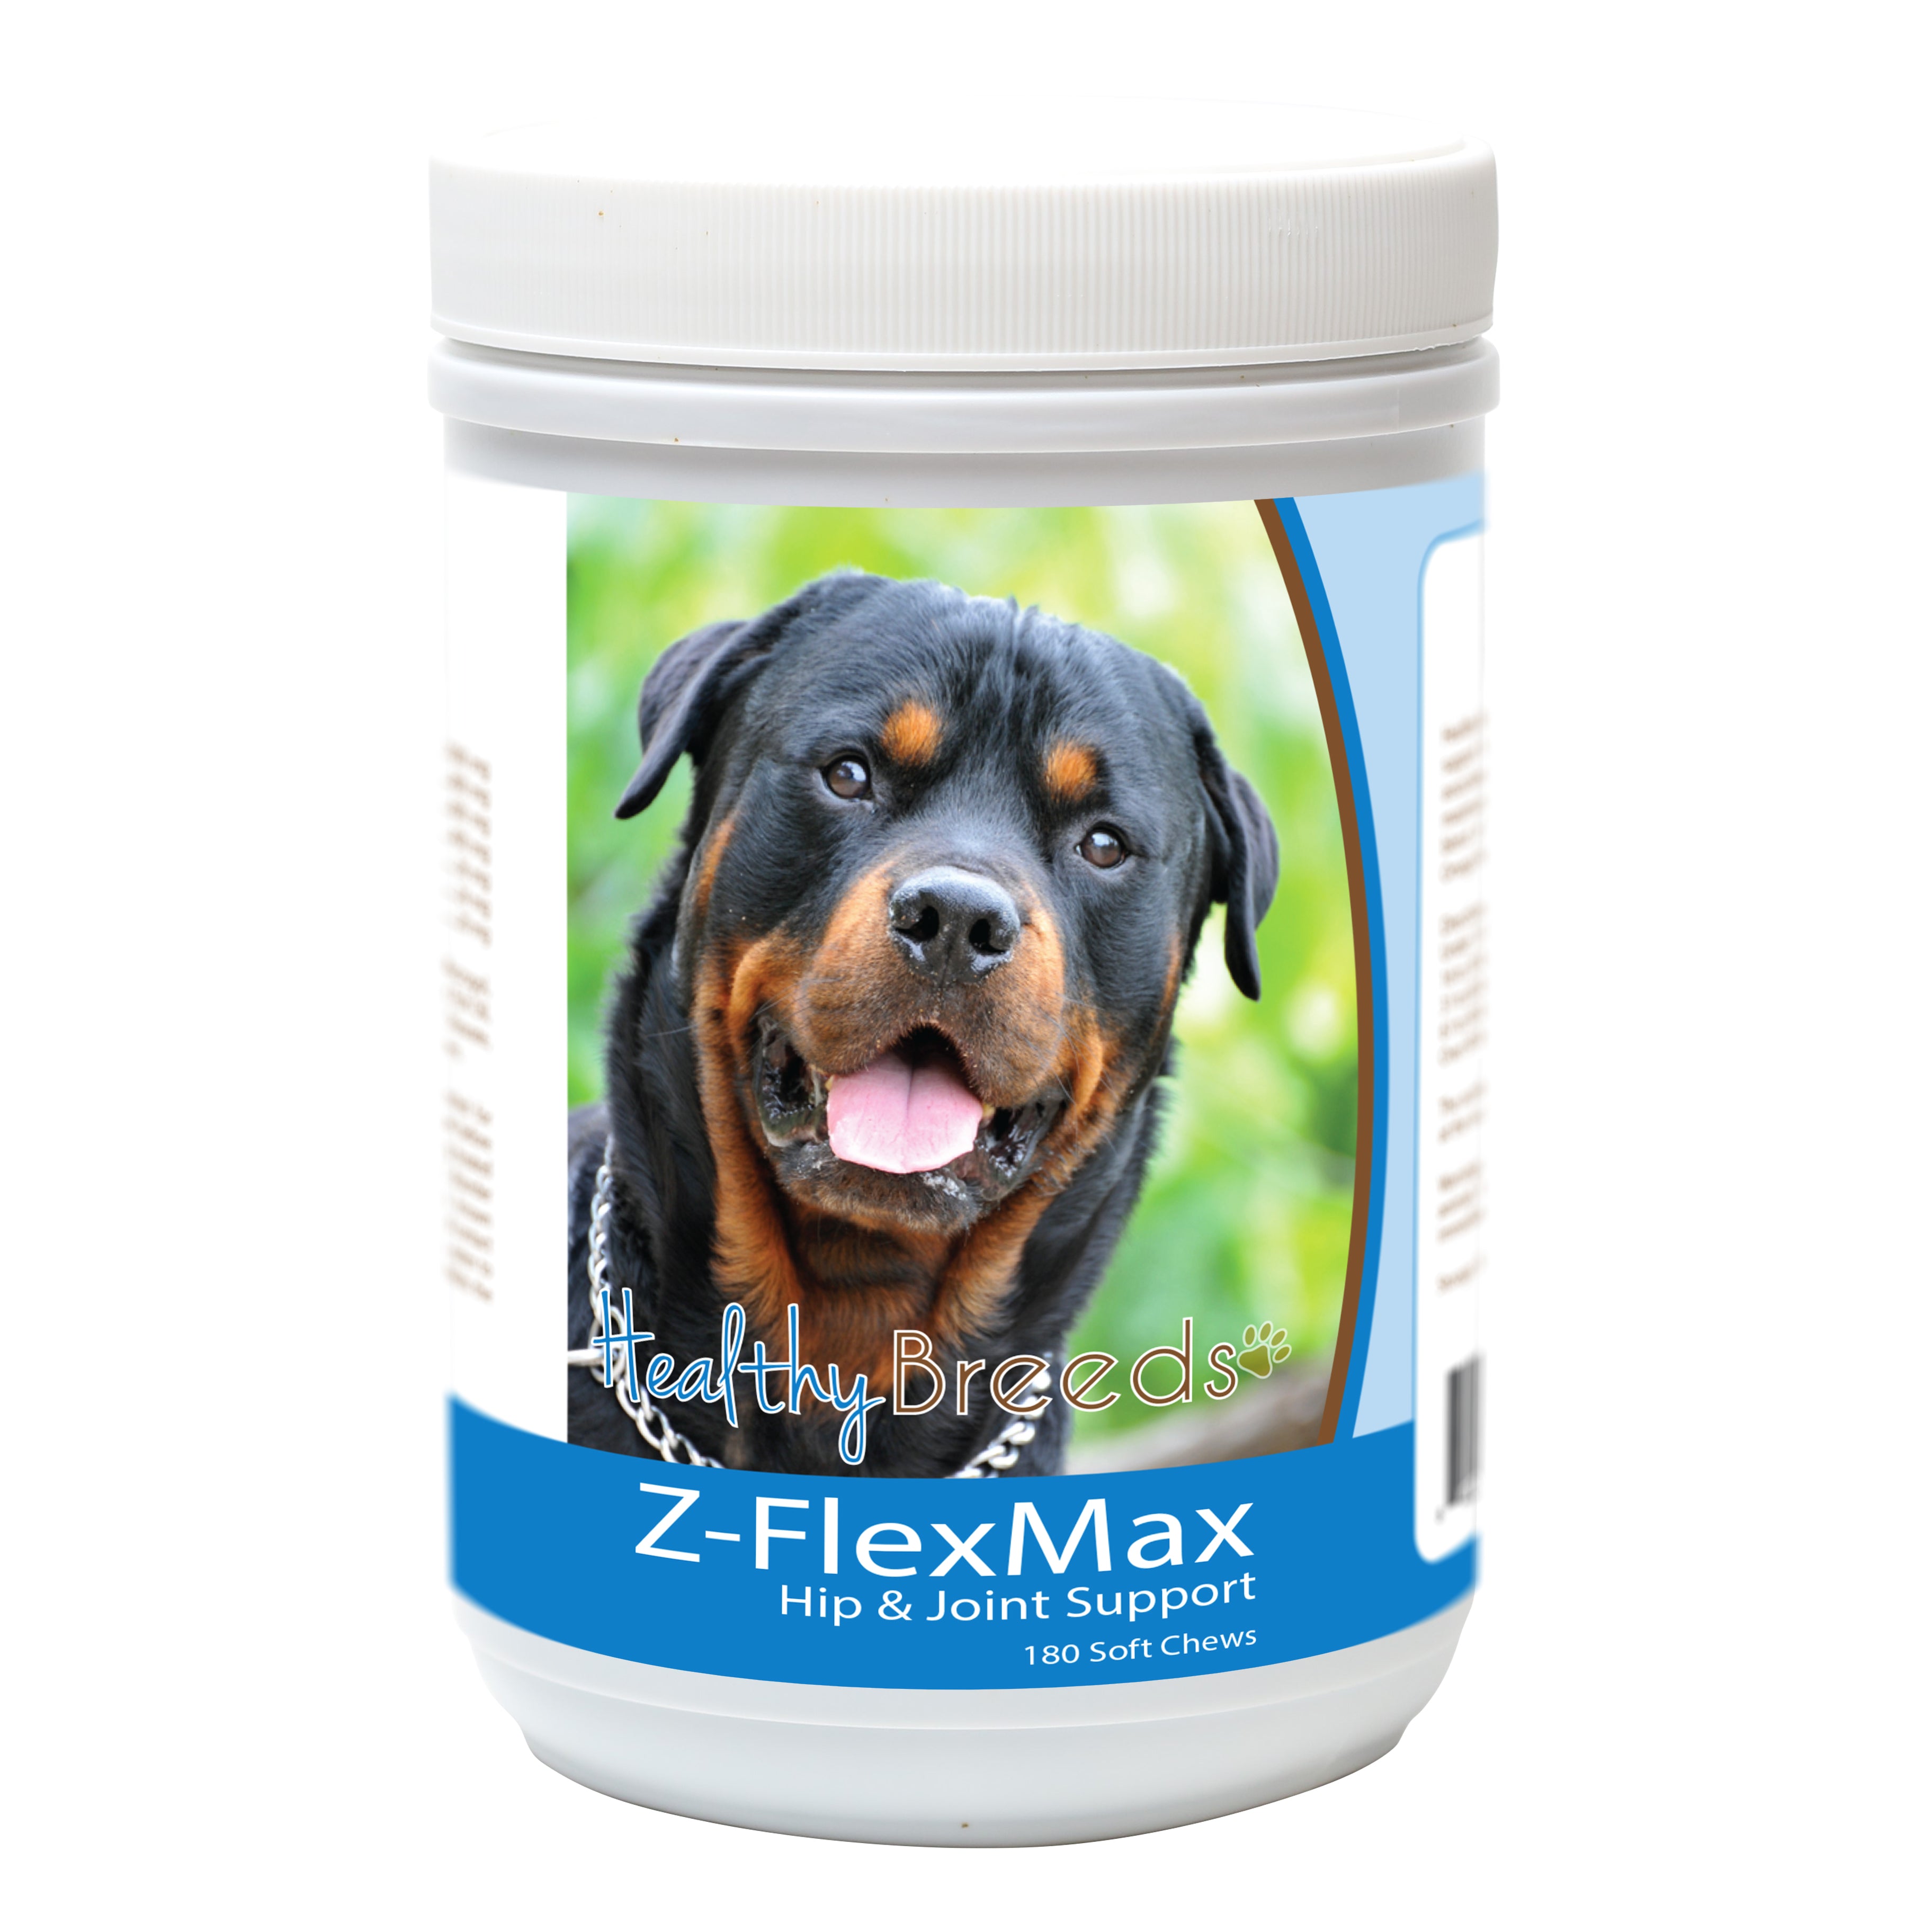 Rottweiler Z-Flex Max Dog Hip and Joint Support 180 Count